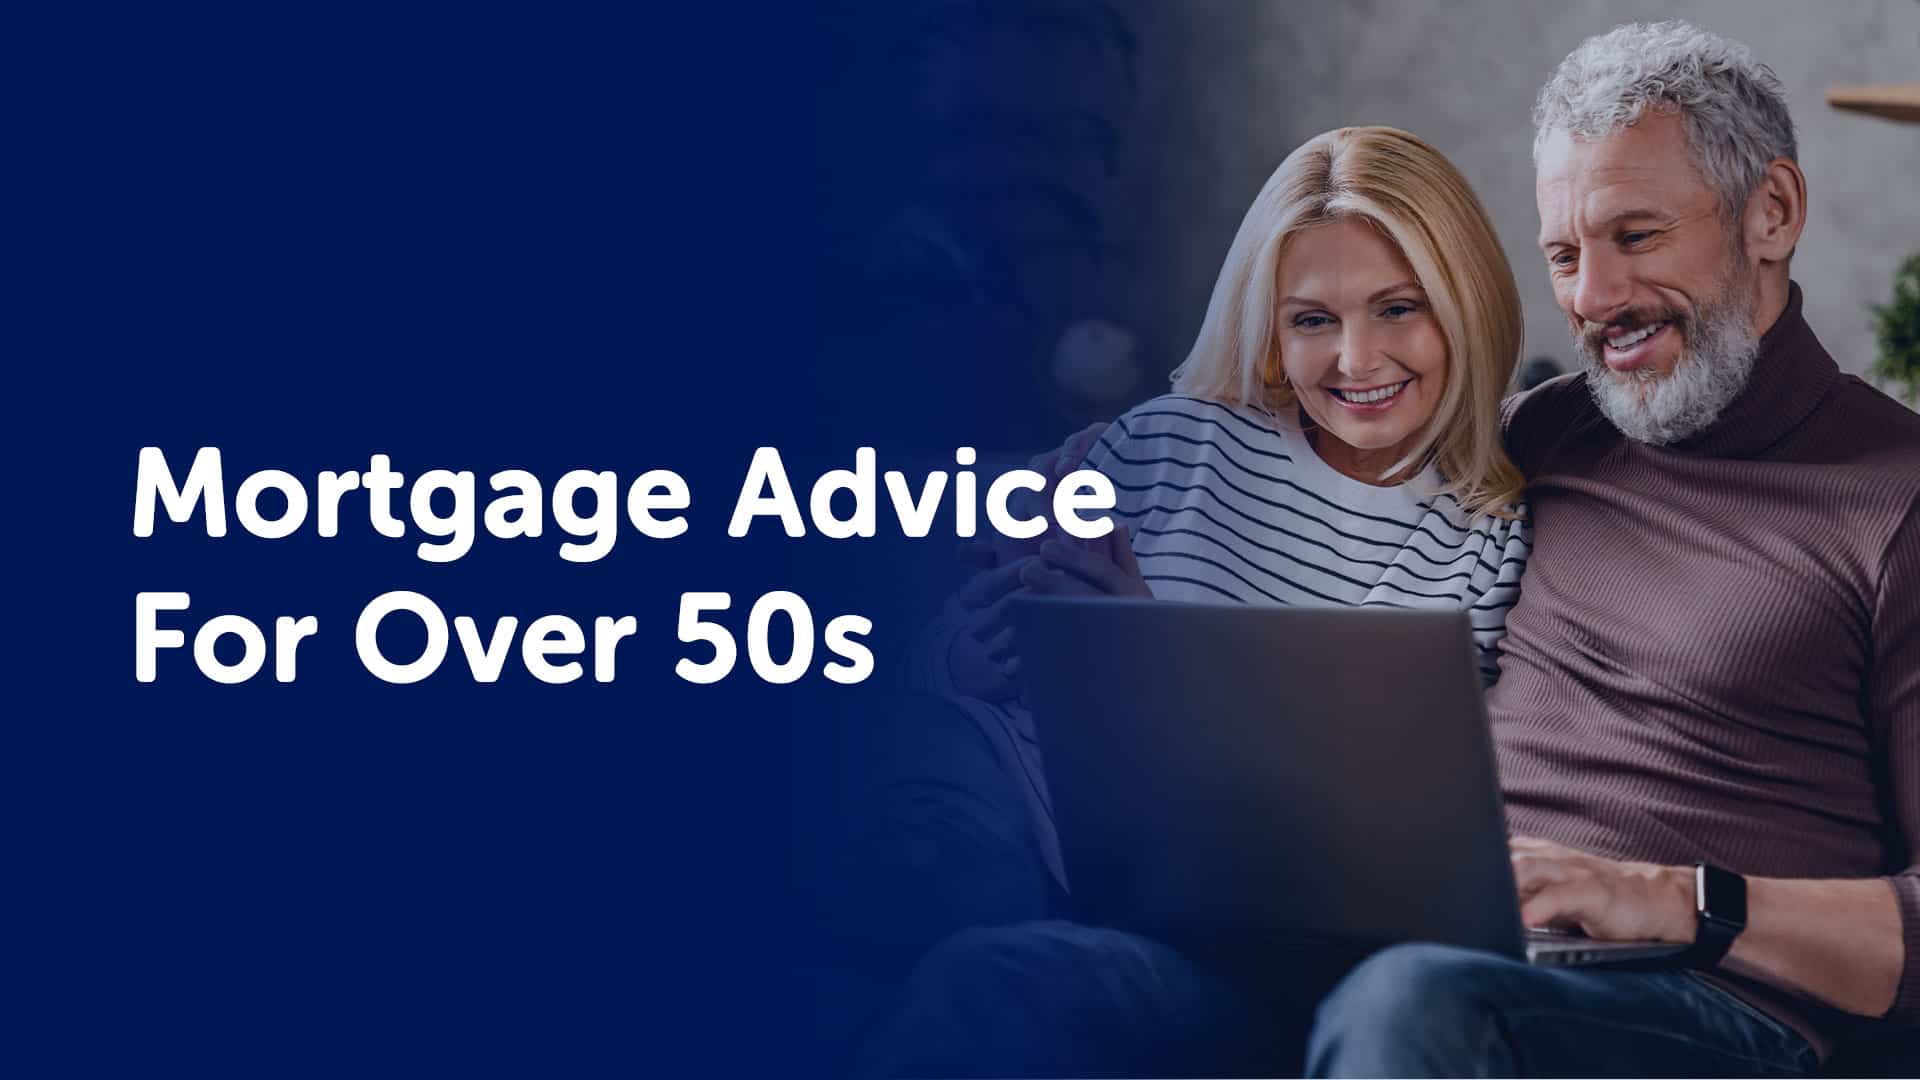 Mortgages For Over 50s in Liverpool